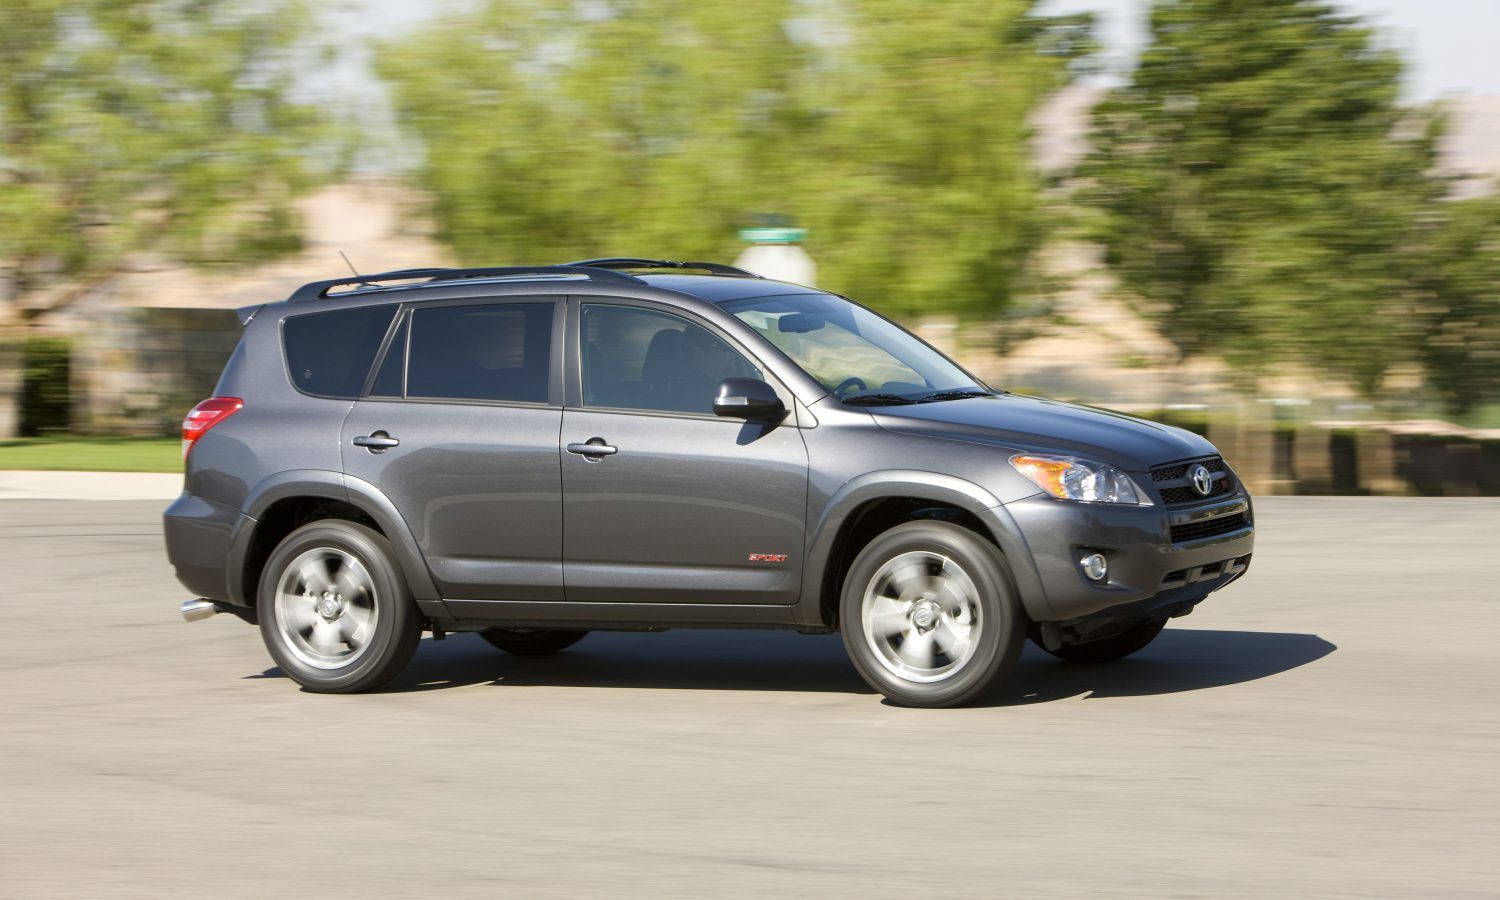 The Best Toyota RAV4 Trim And Model Year To Buy Used